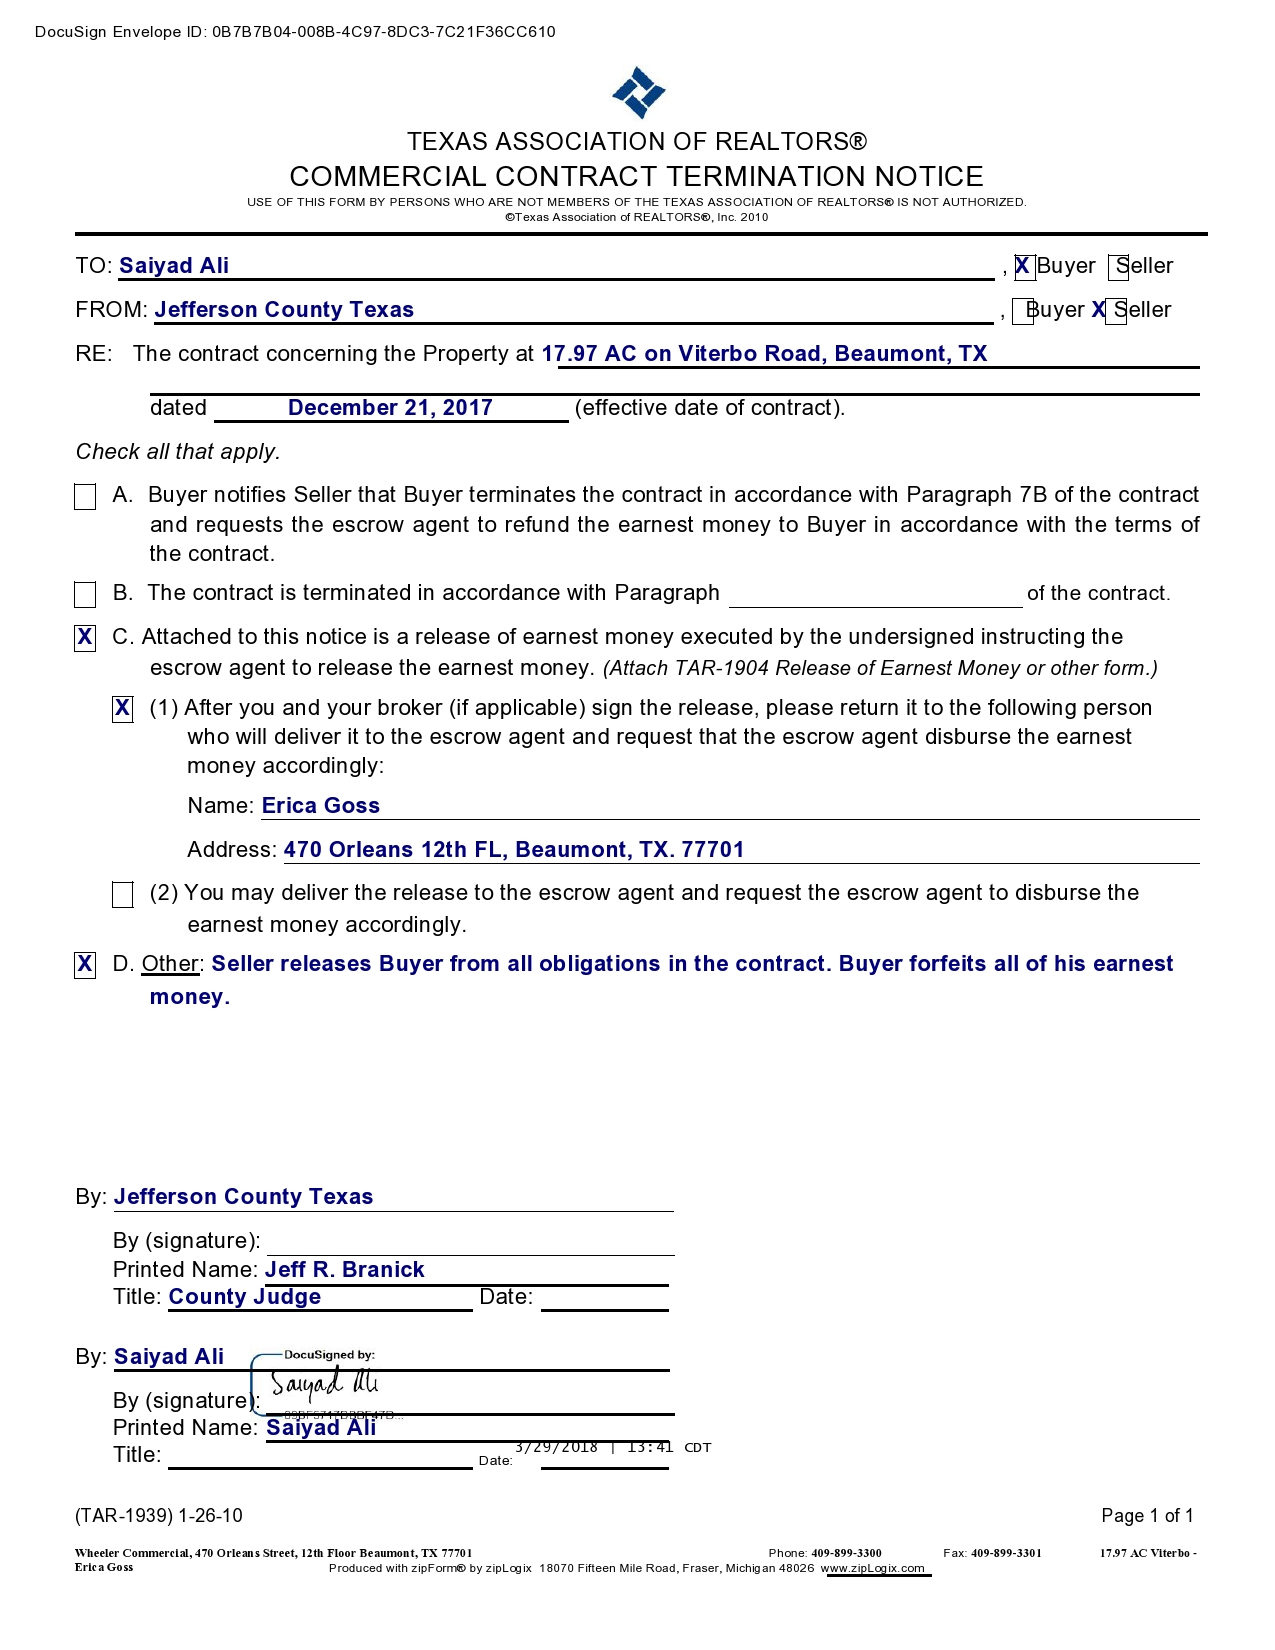 Free contract termination letter 16